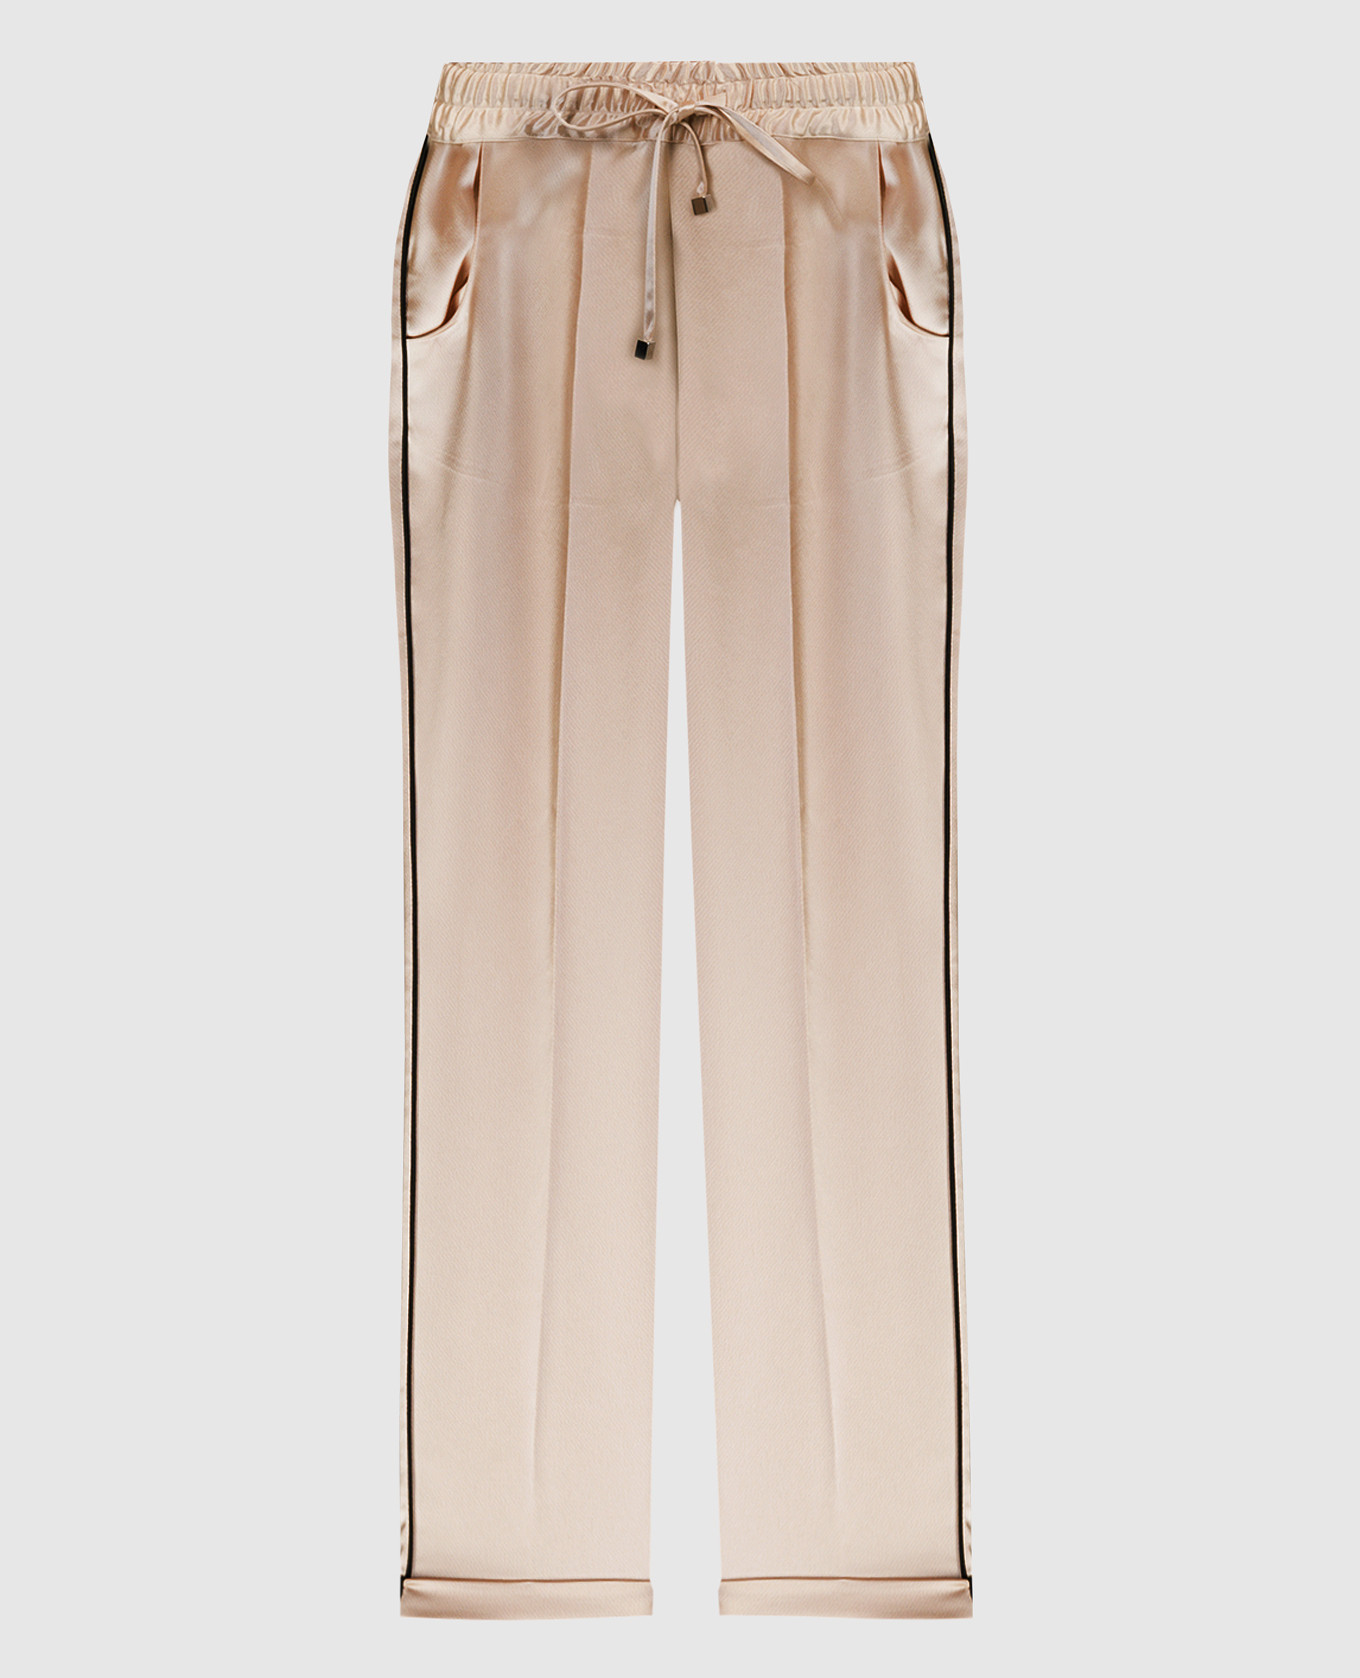 Beige pants with contrasting edging